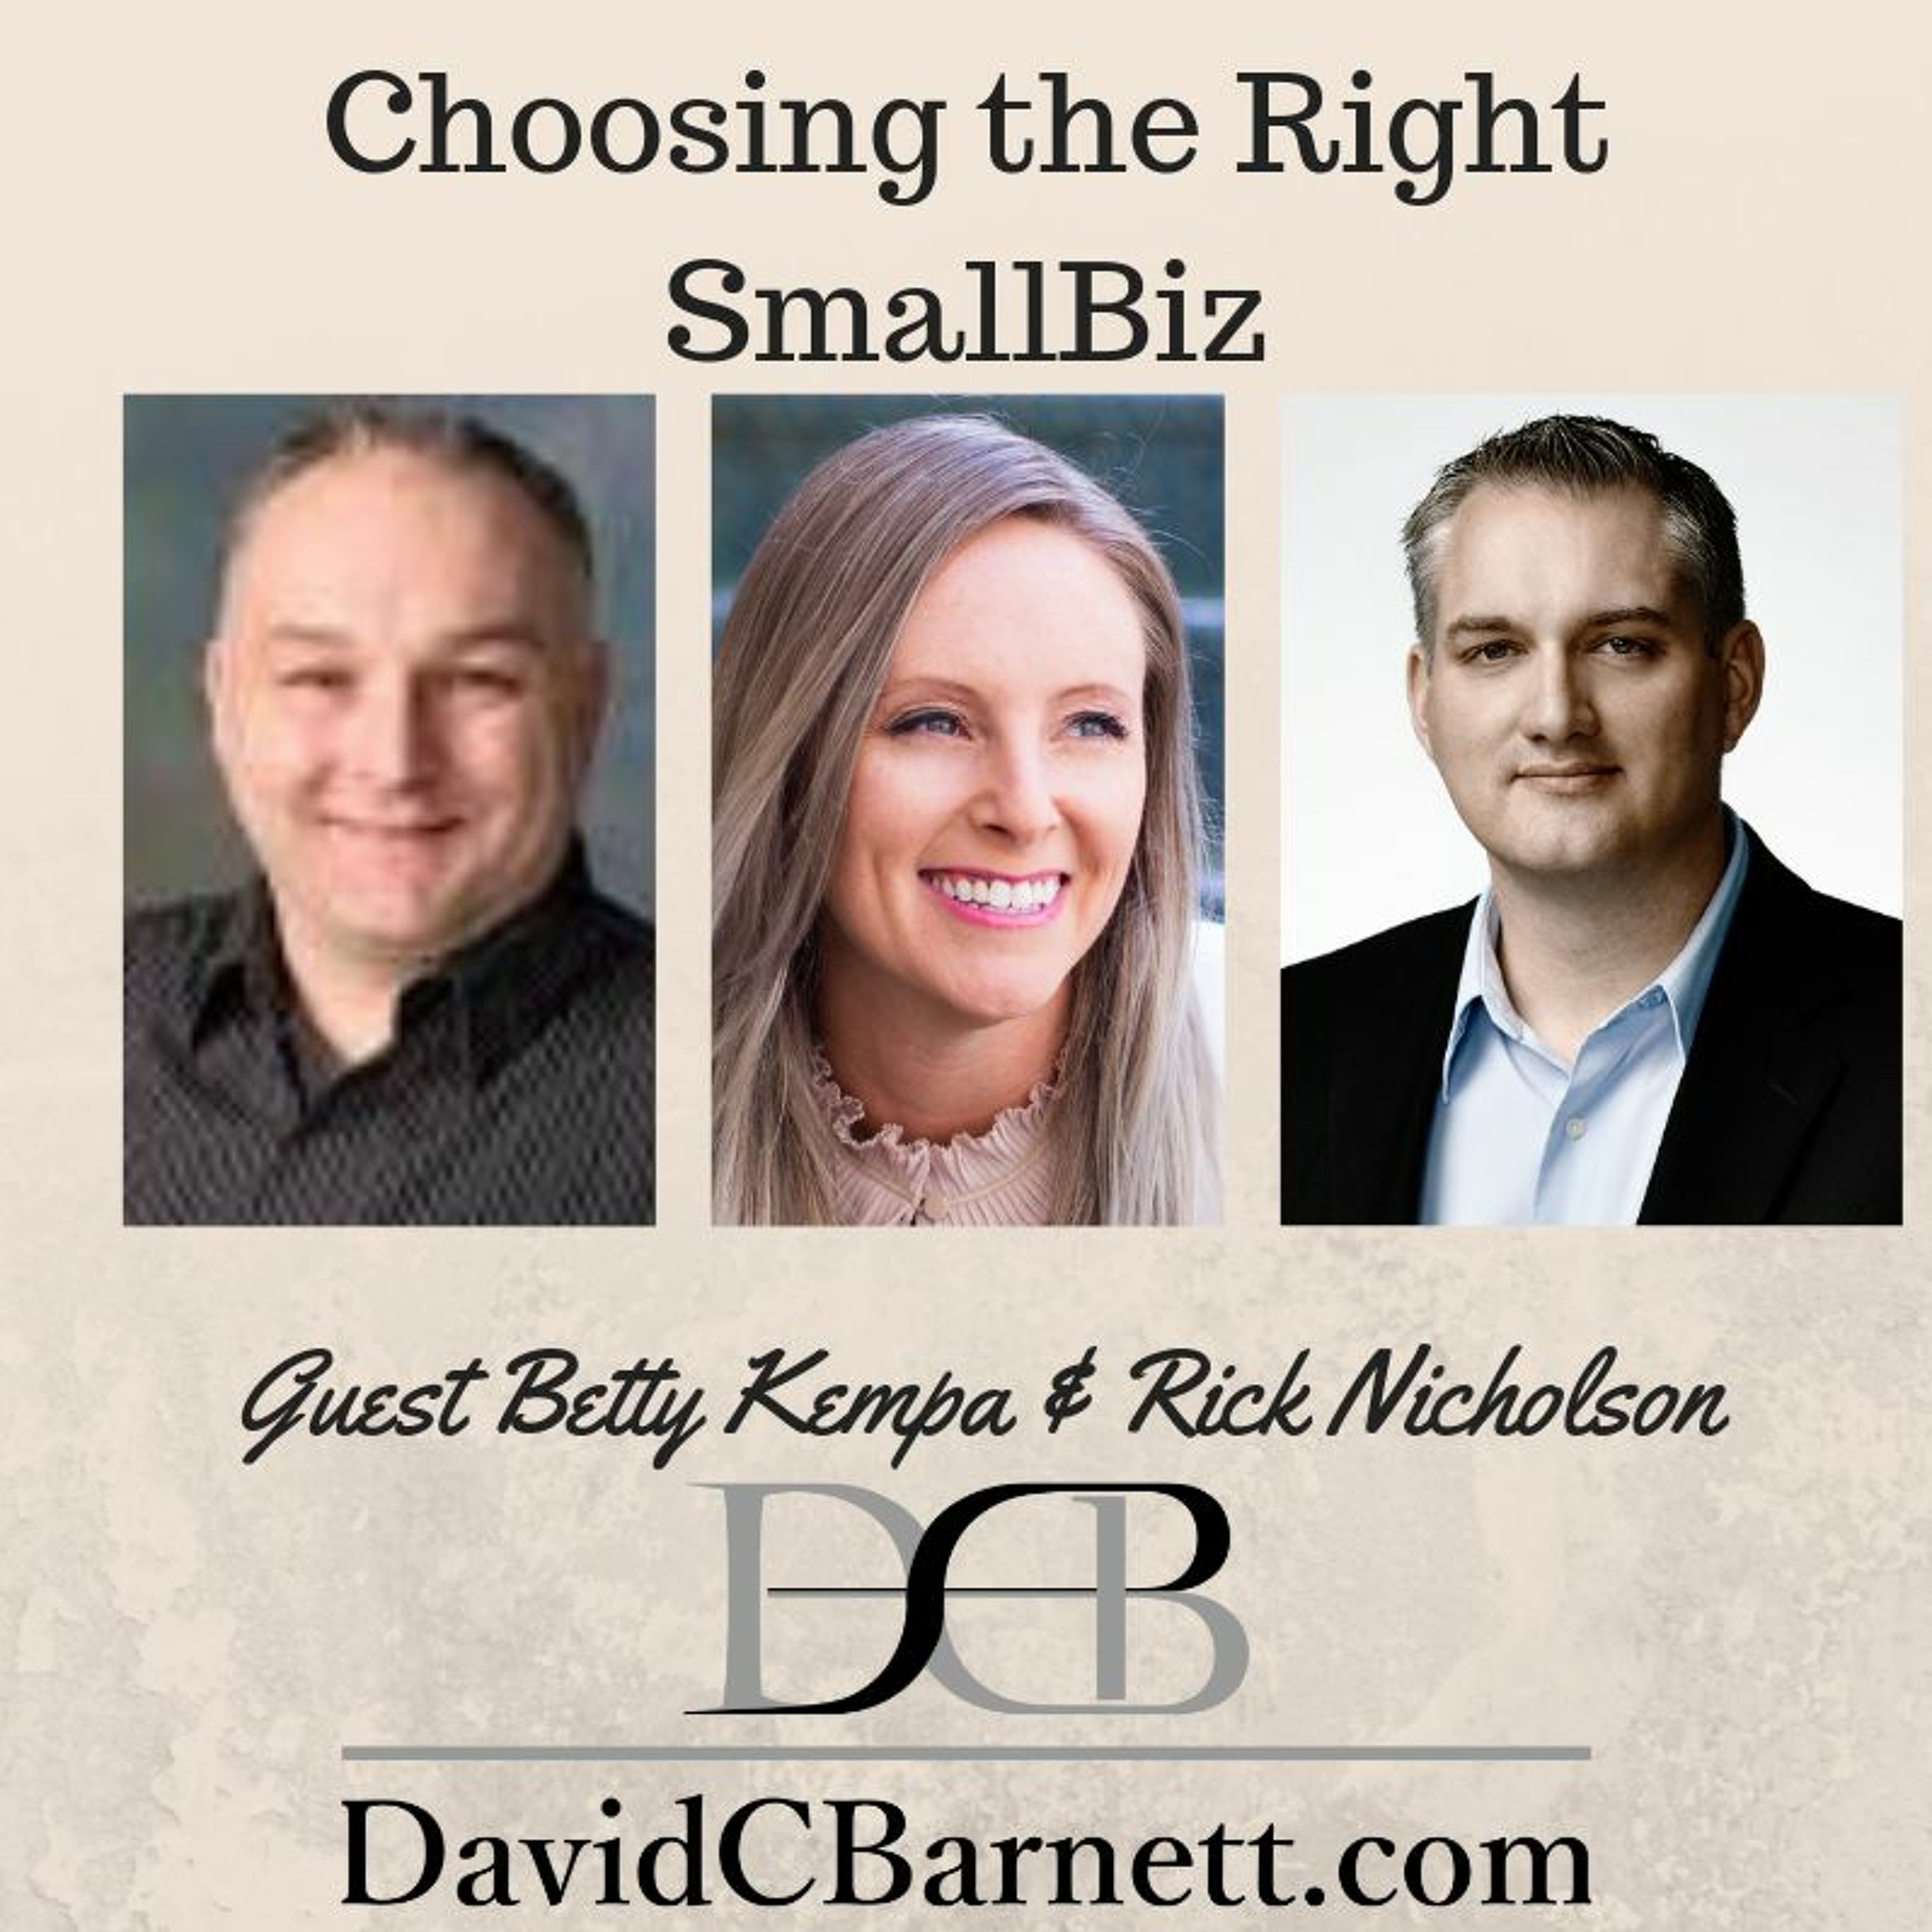 Choosing the right small business when you've only ever been an employee